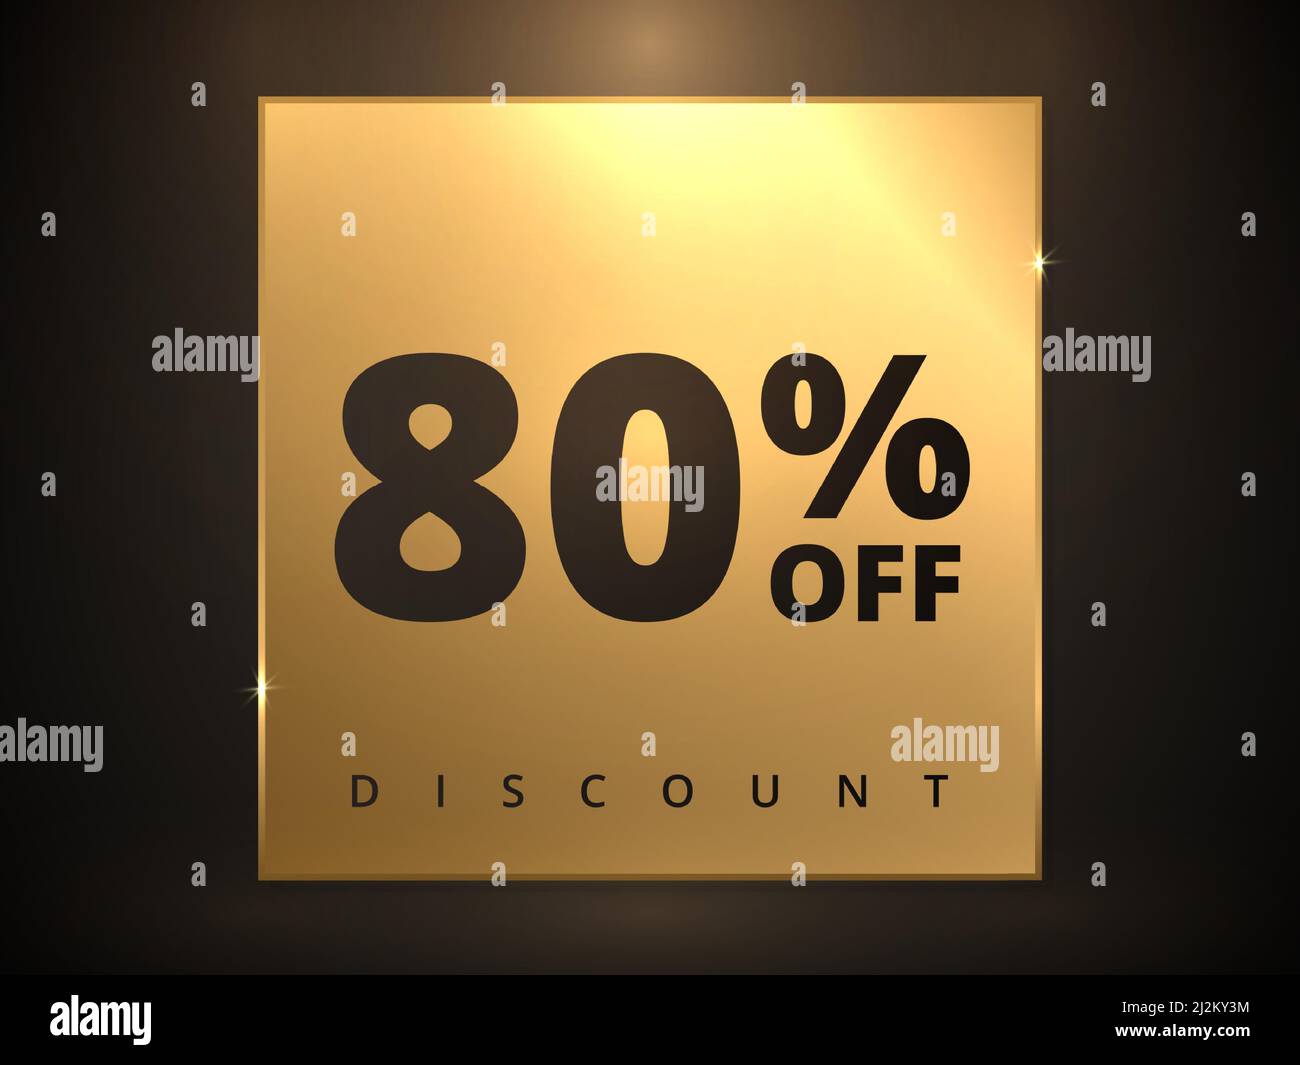 80 off discount banner. Special offer sale 80 percent off. Sale discount offer. Luxury promotion banner eighty percent discount in golden square Stock Vector